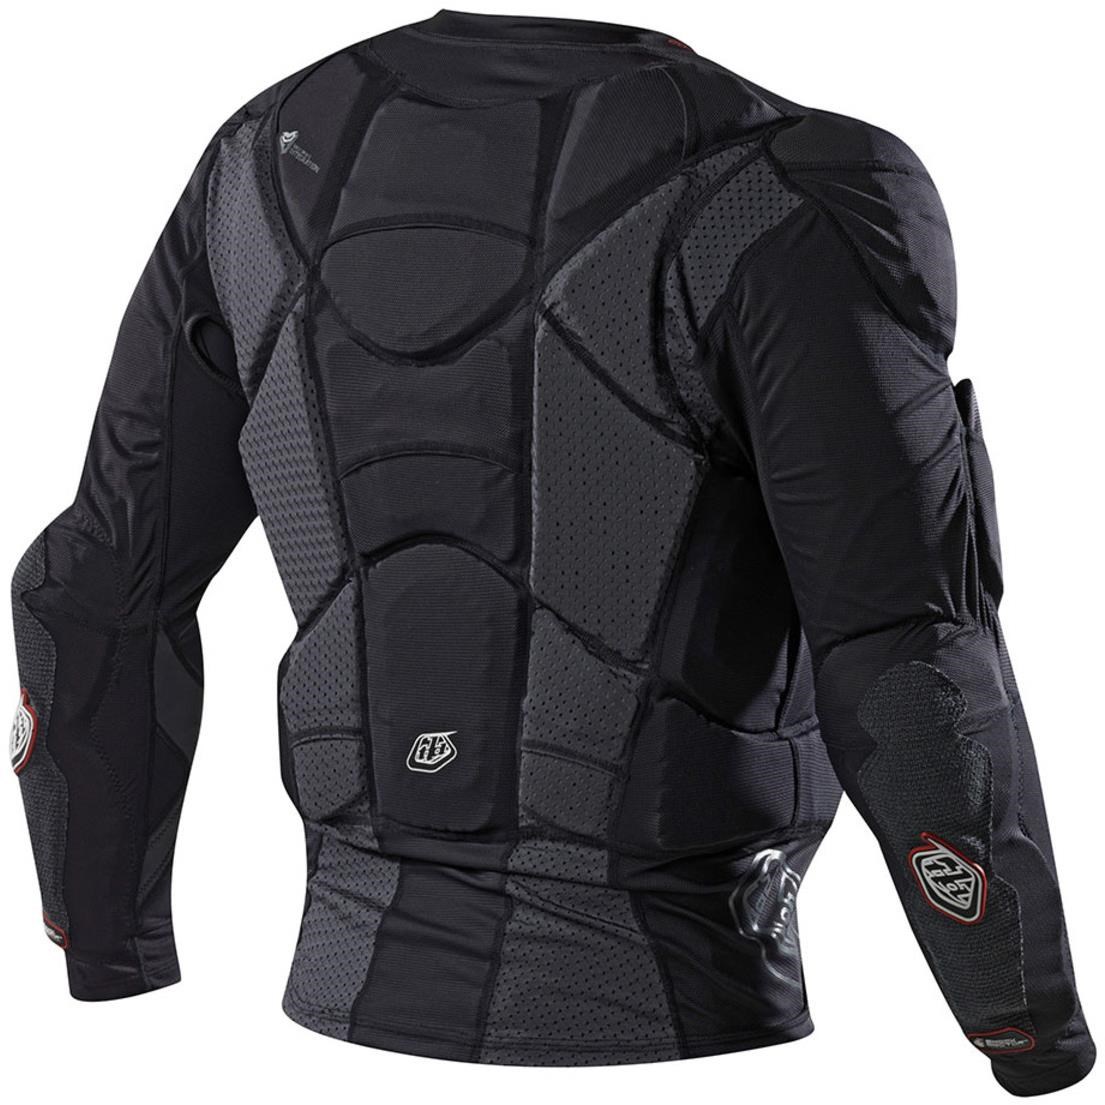 Troy Lee Designs 7855 Upper Protection Long Sleeve MTB Cycling Shirt